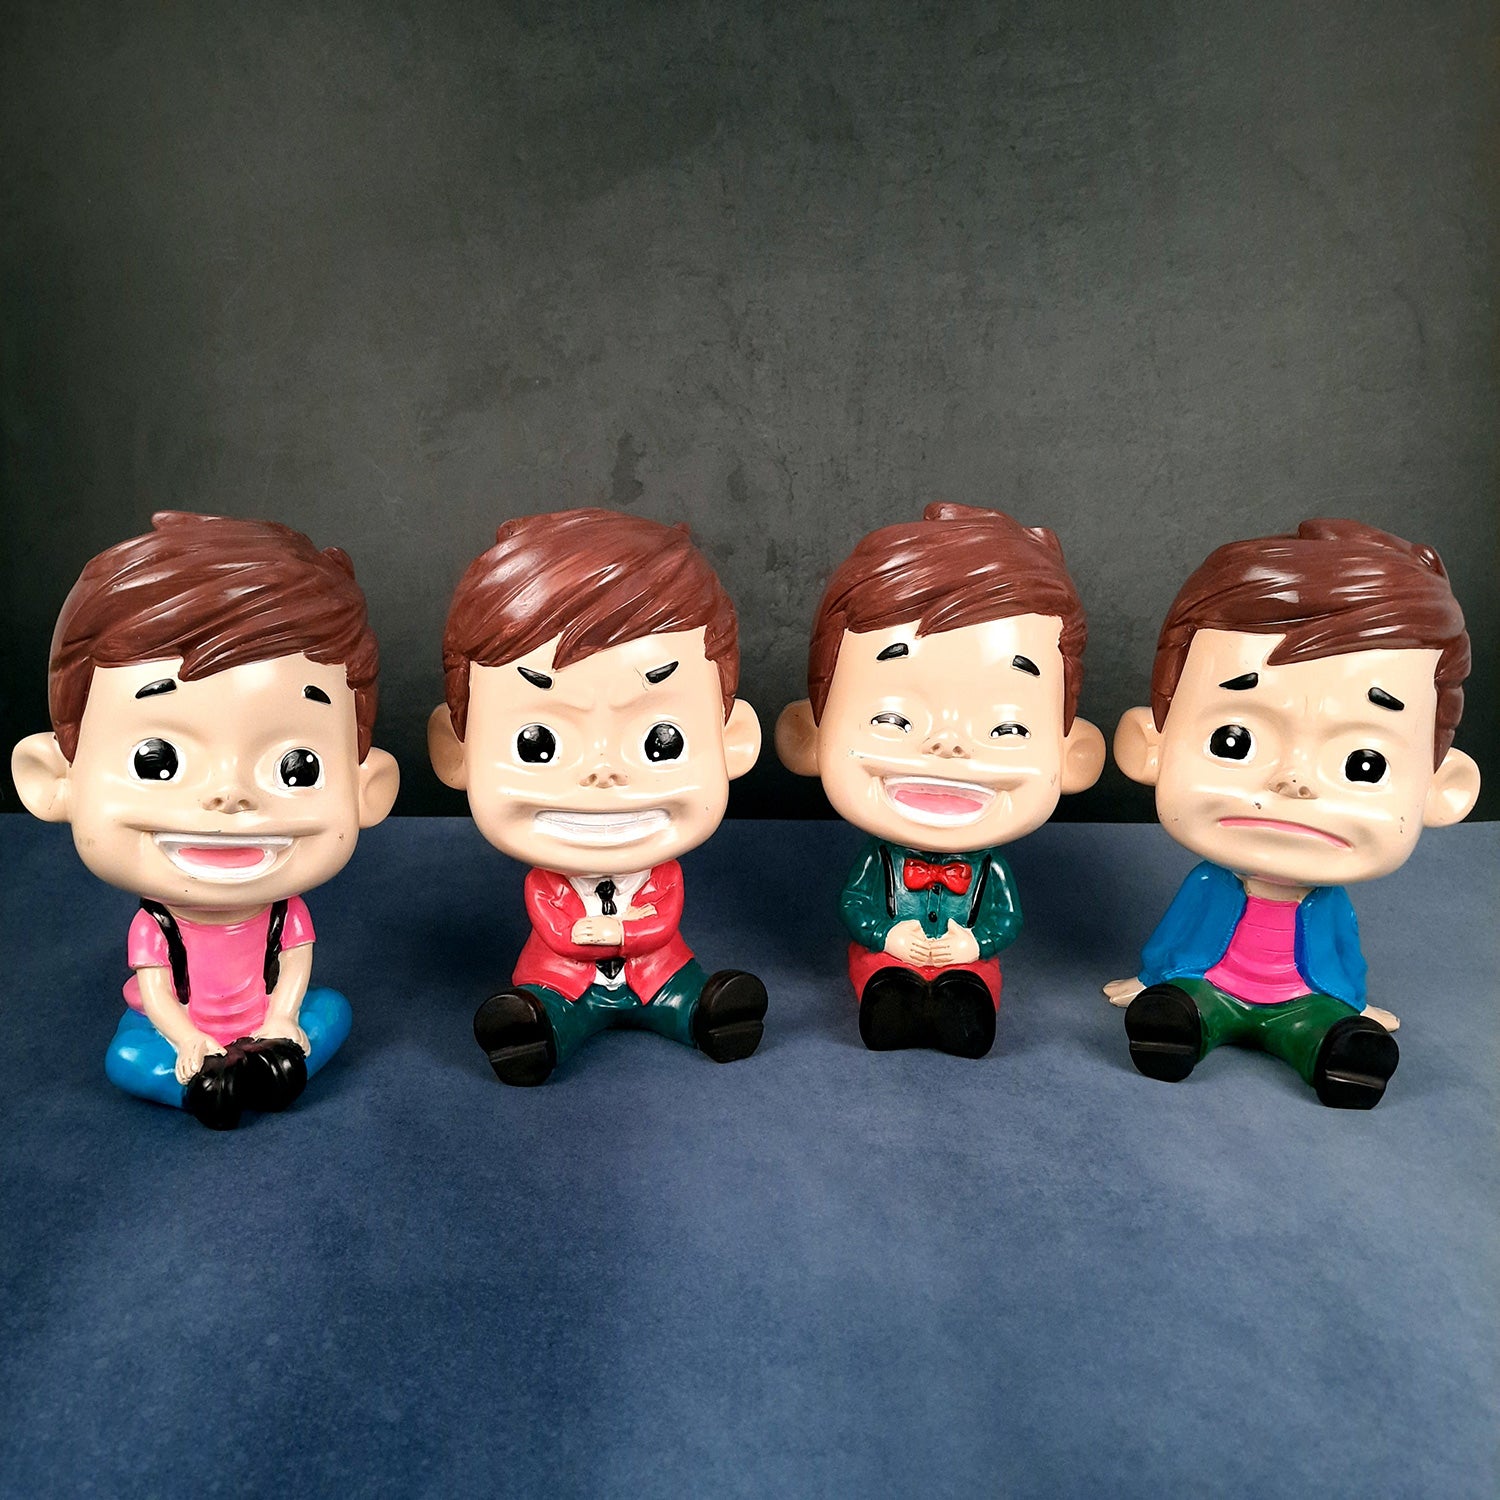 Decorative Sitting Boys Showpiece Human Figurine | Cute Resin Showpiece - for Living Room, Home, Table Decor, Gift for Him - 8 Inch (Set of 4)-Apkamart